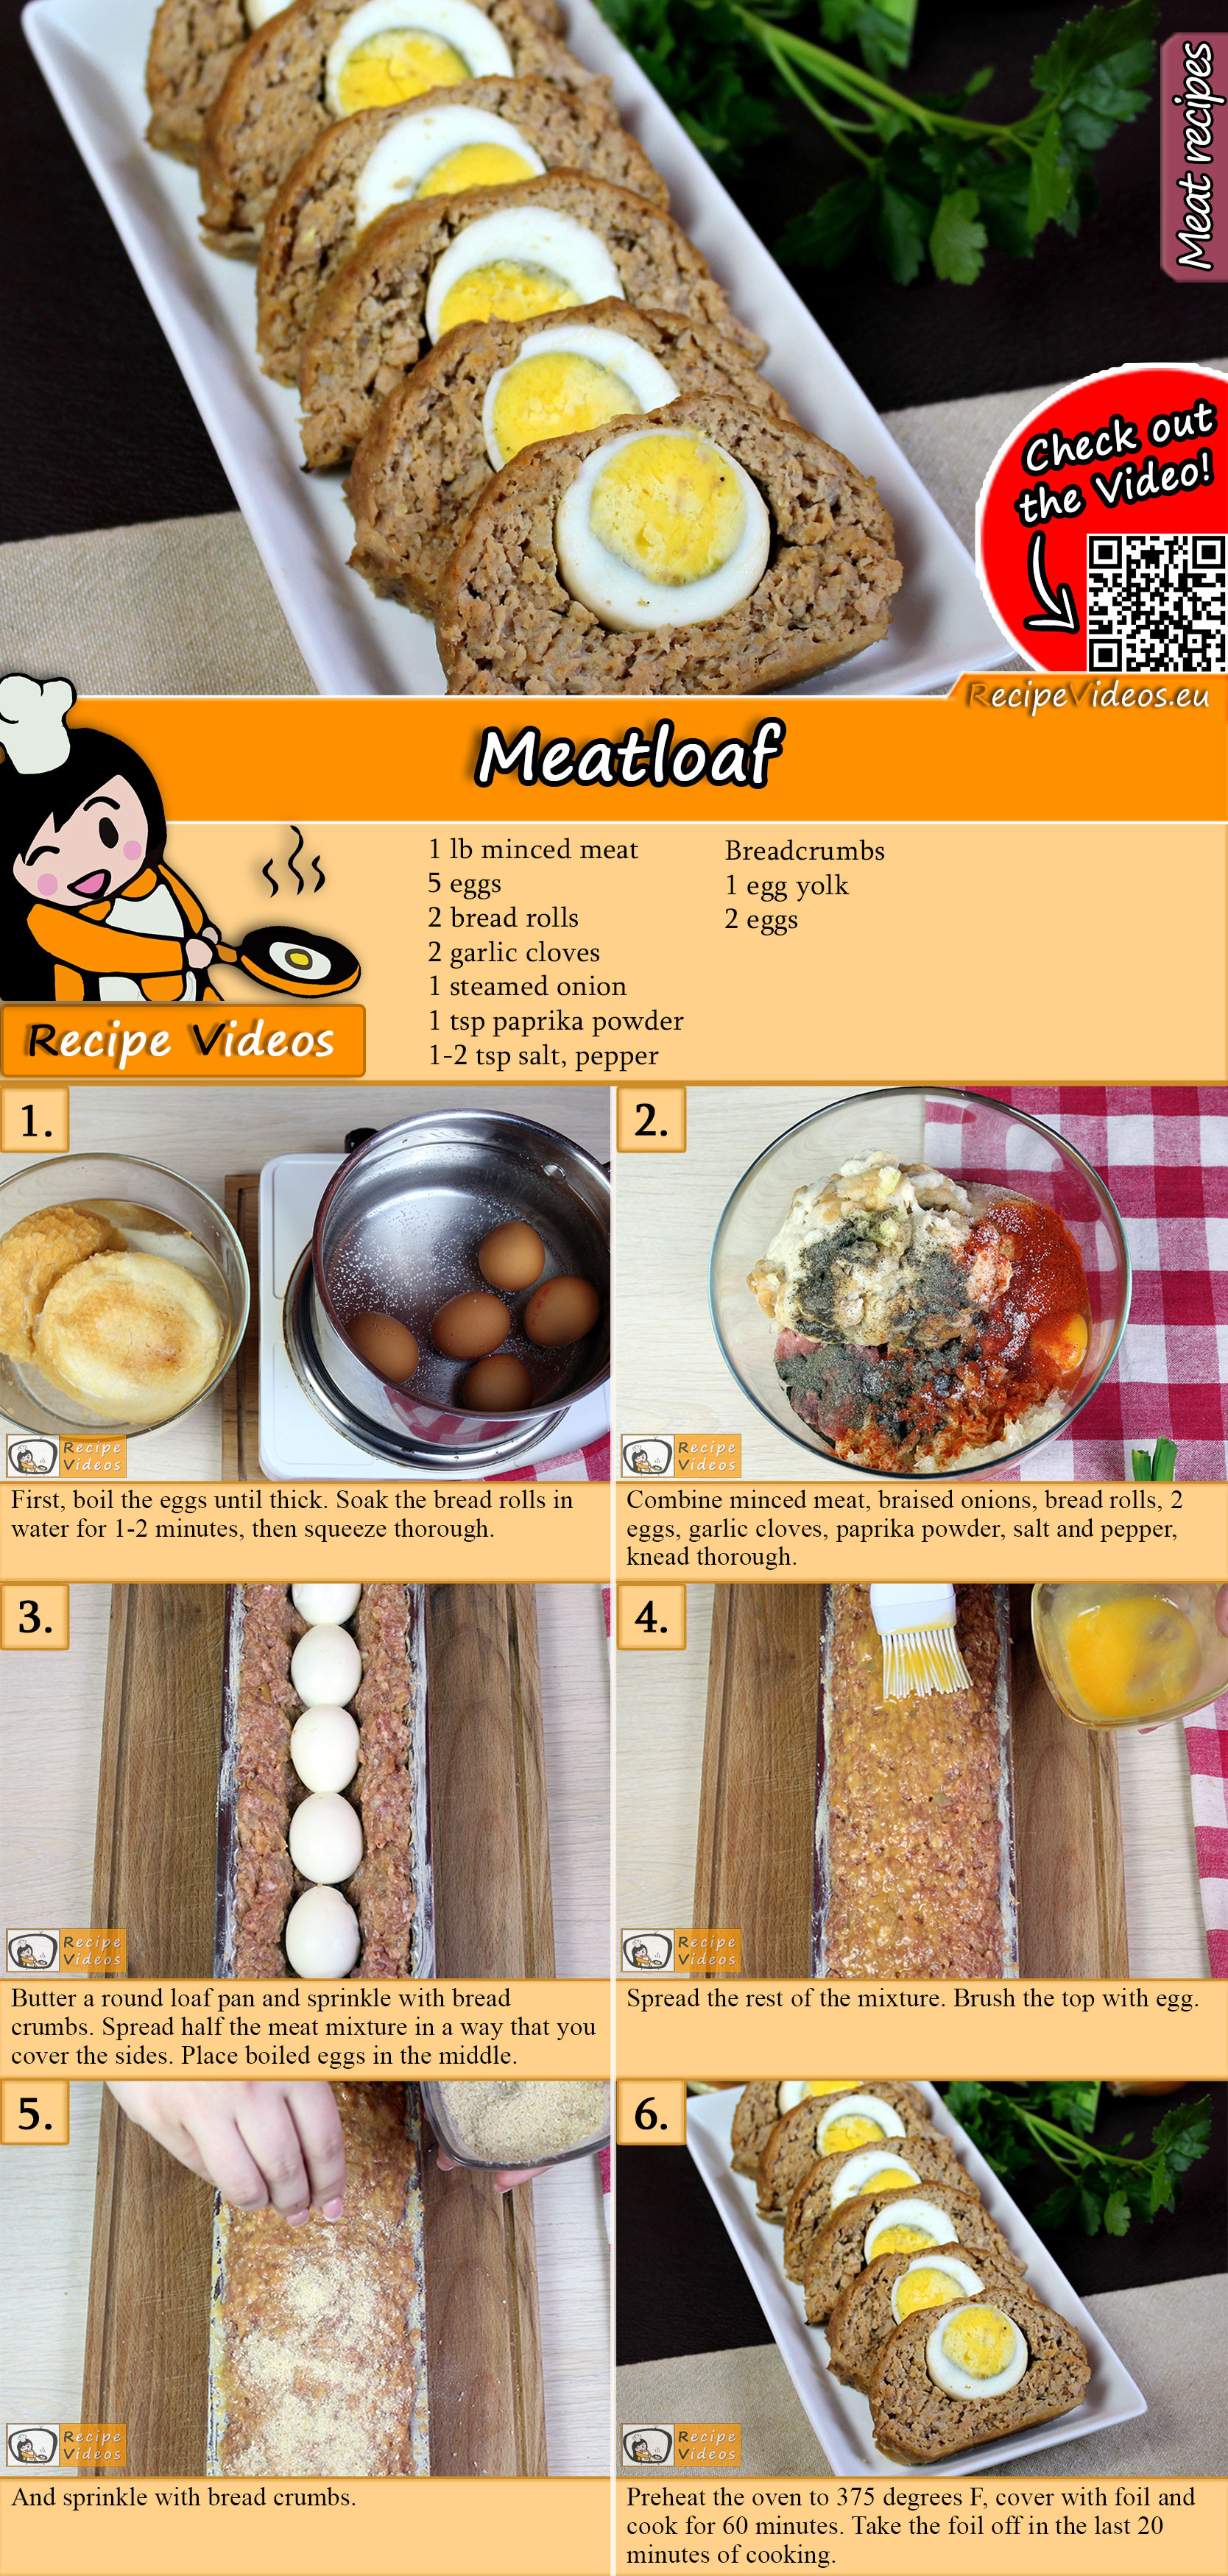 Meatloaf recipe with video